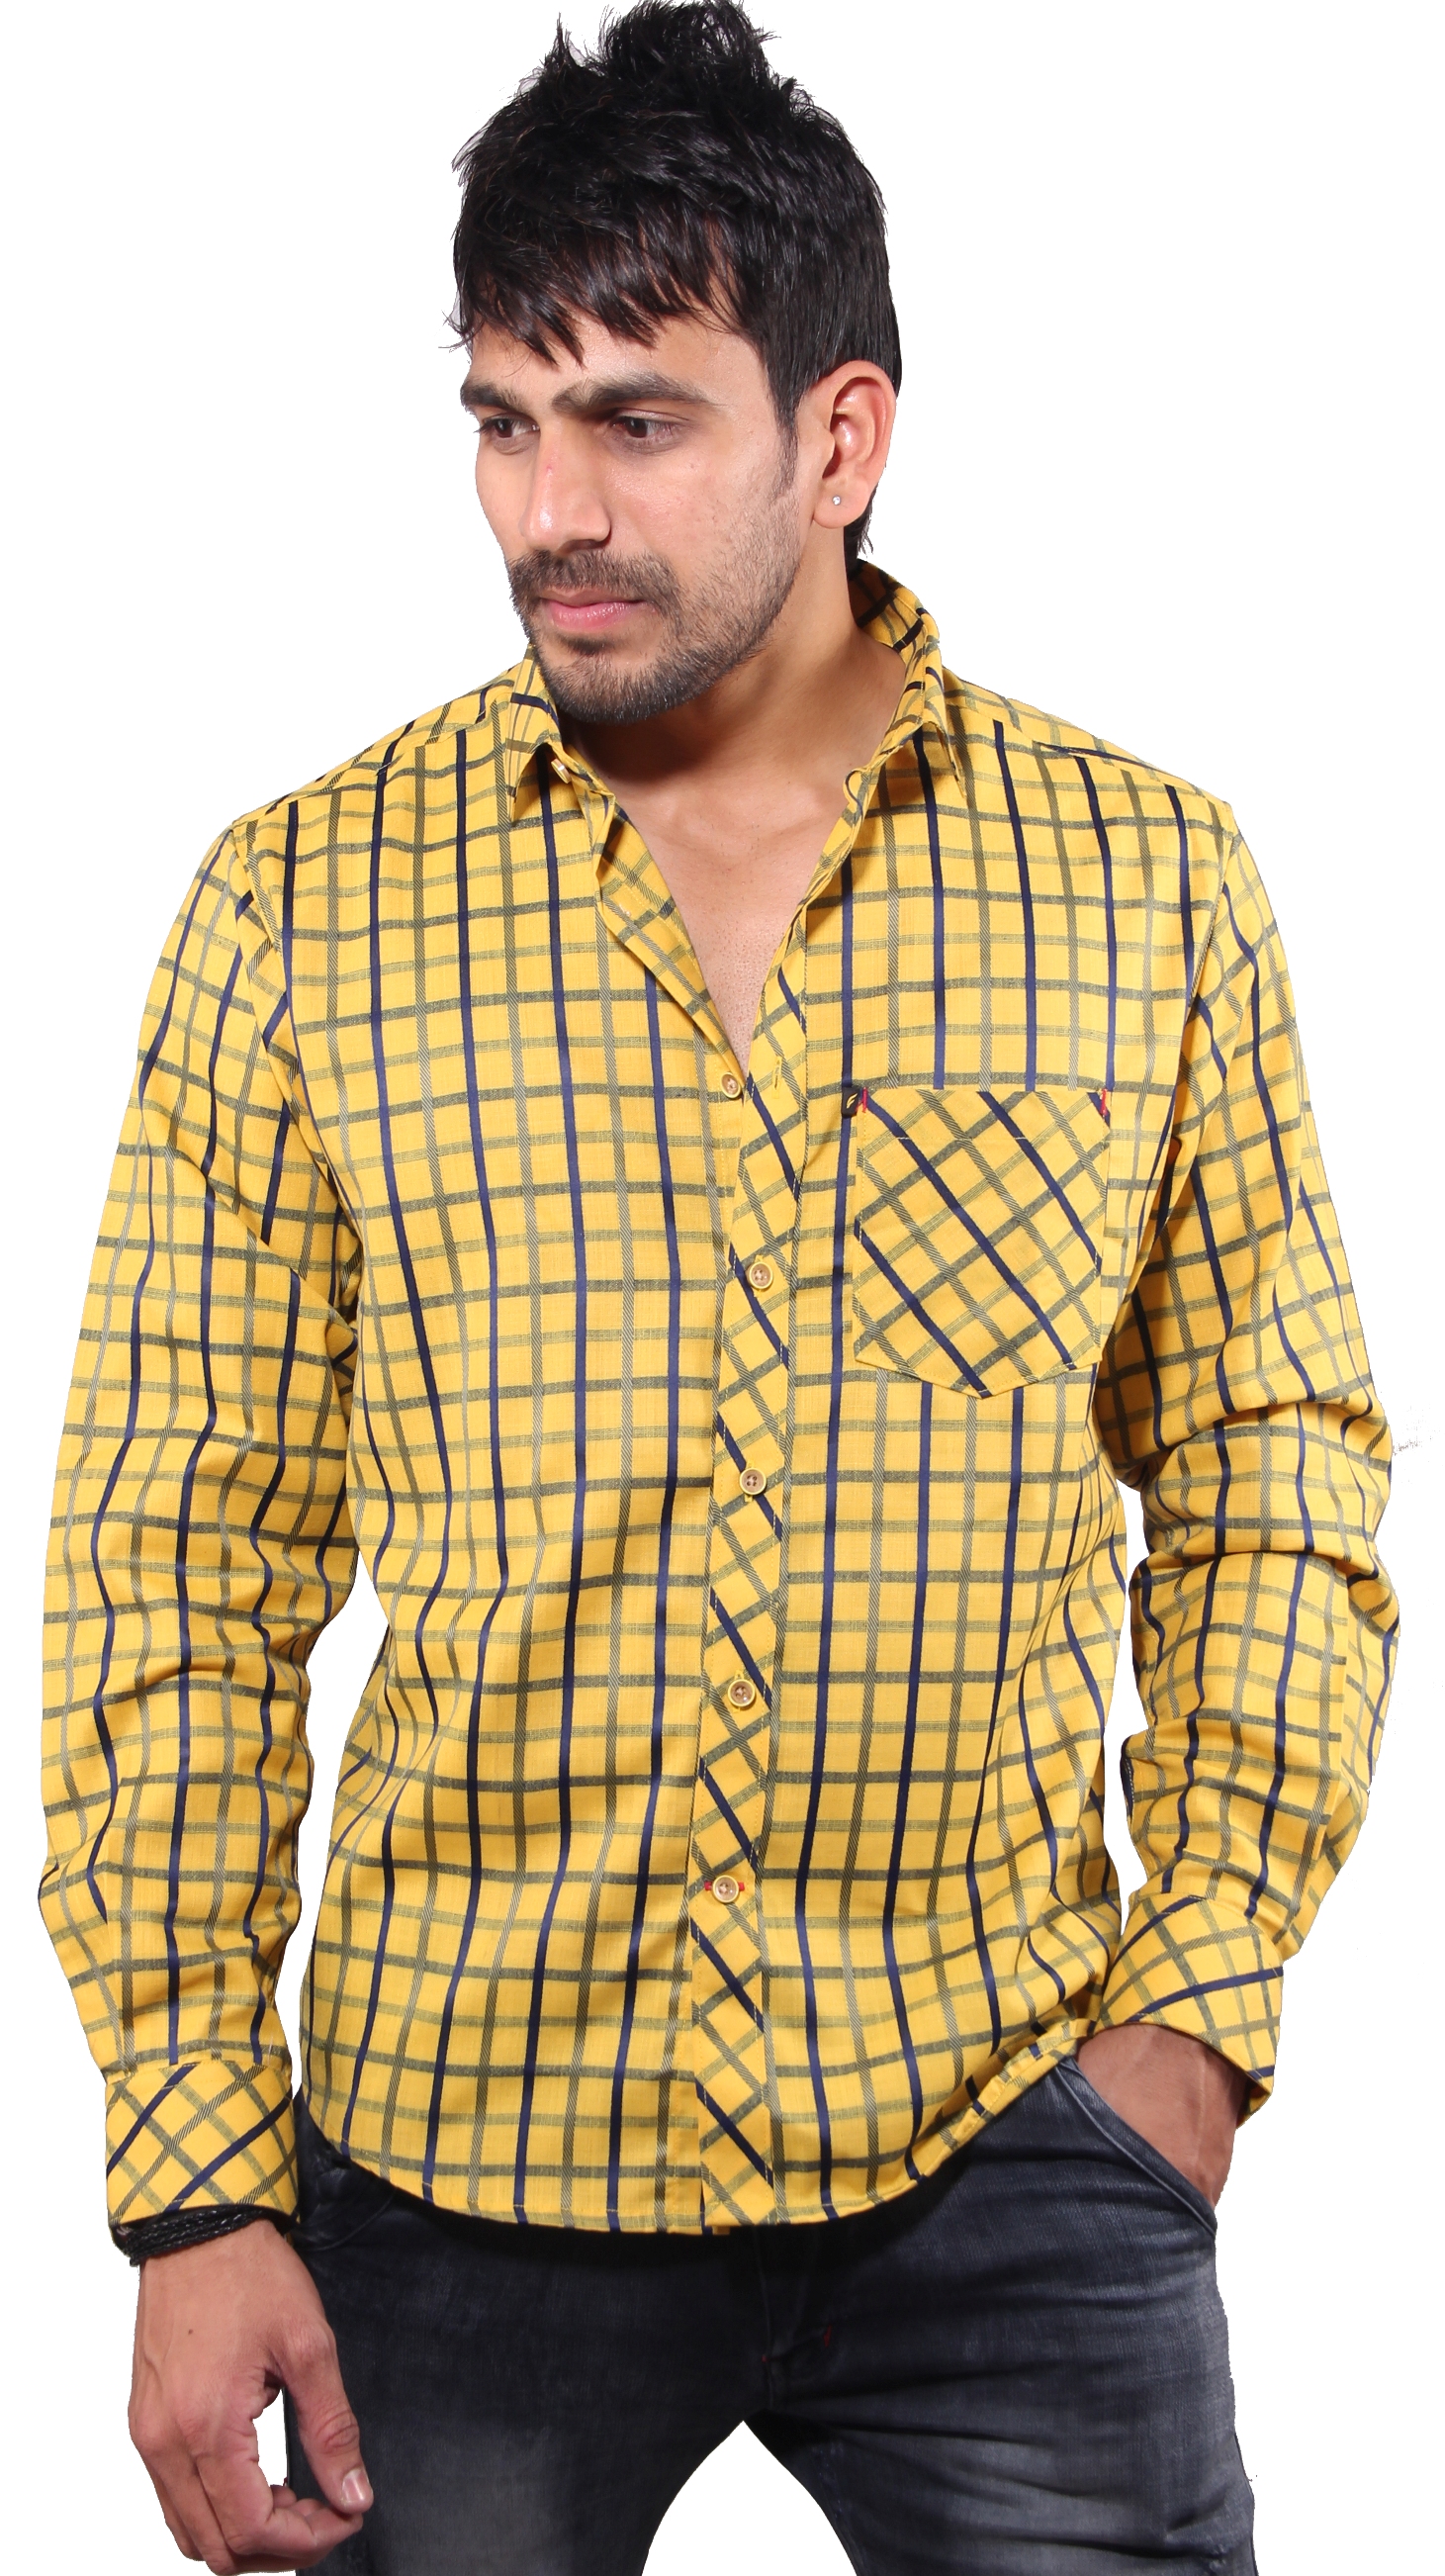 Men's Casual Shirt Slim Fit Wear Cotton Full Sleeve Check from FAVIO & BLACK TRUFFLE